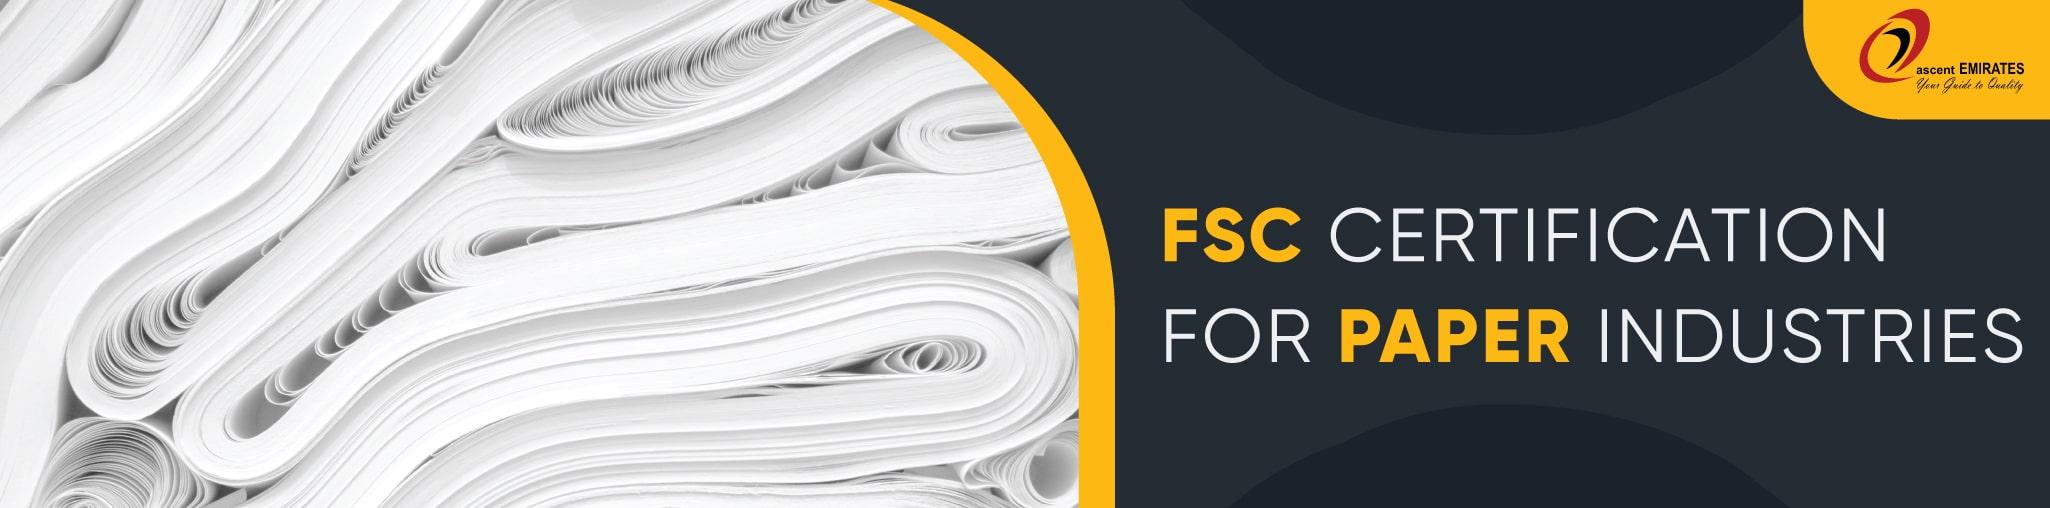 FSC Certification for Paper Industries